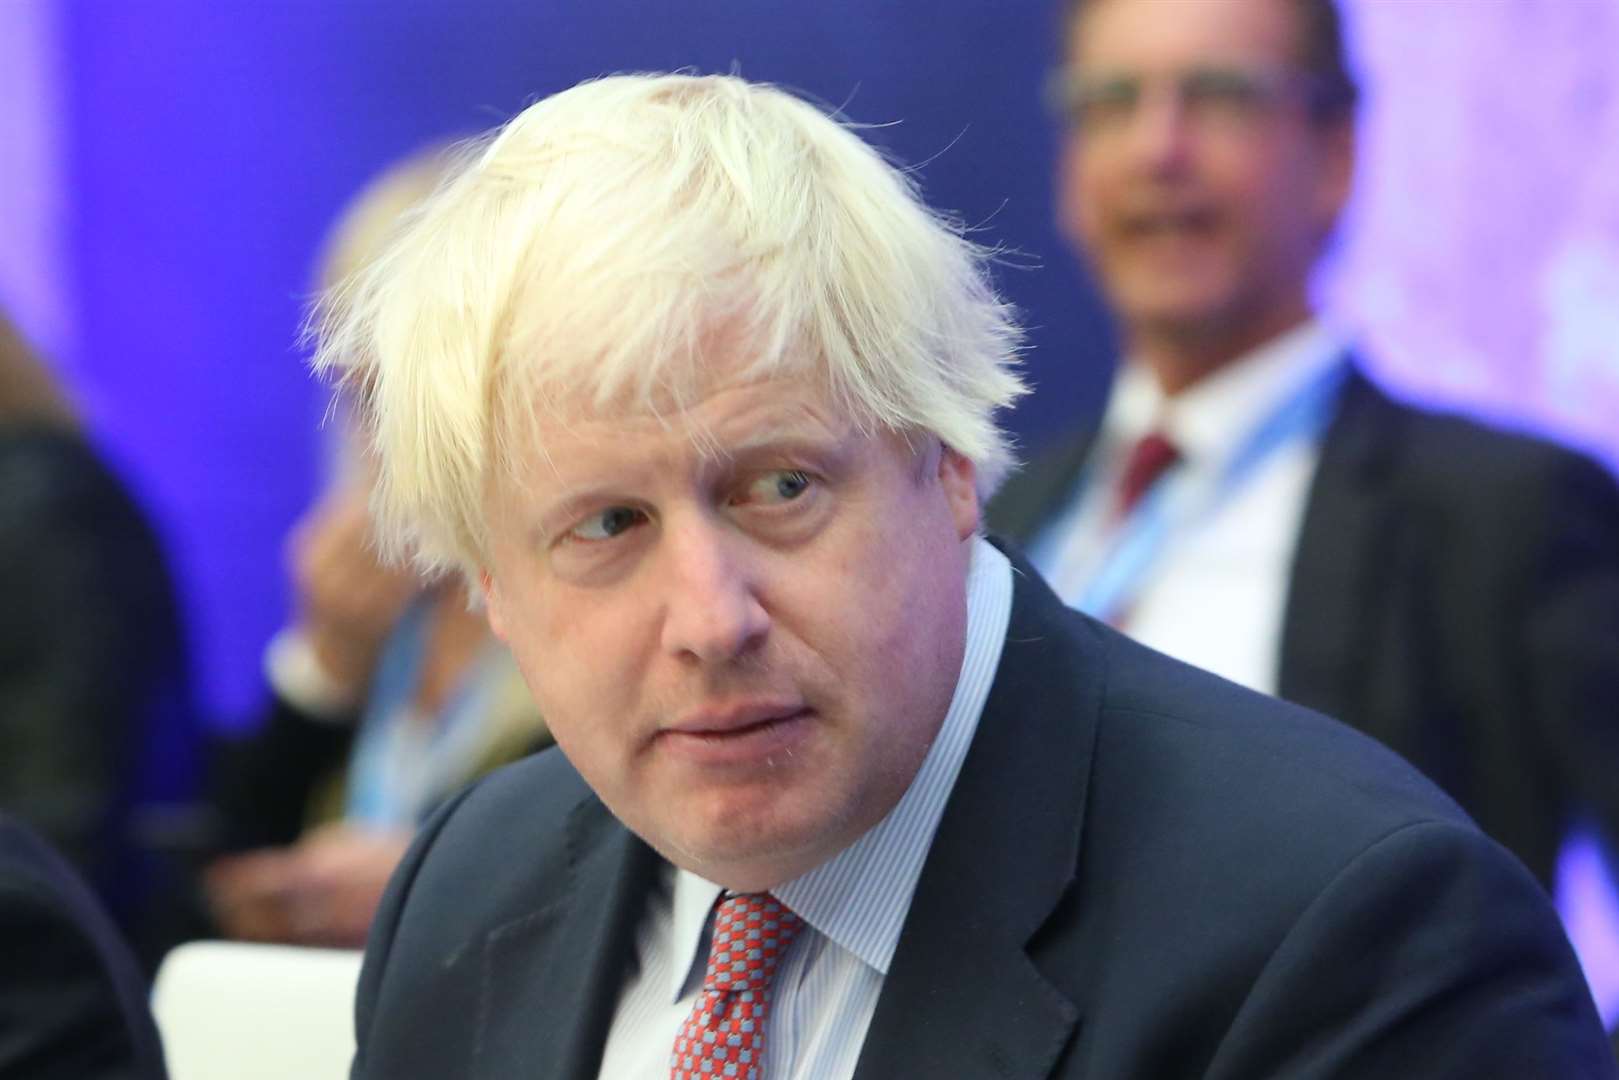 Boris Johnson made the announcement at a Downing Street briefing